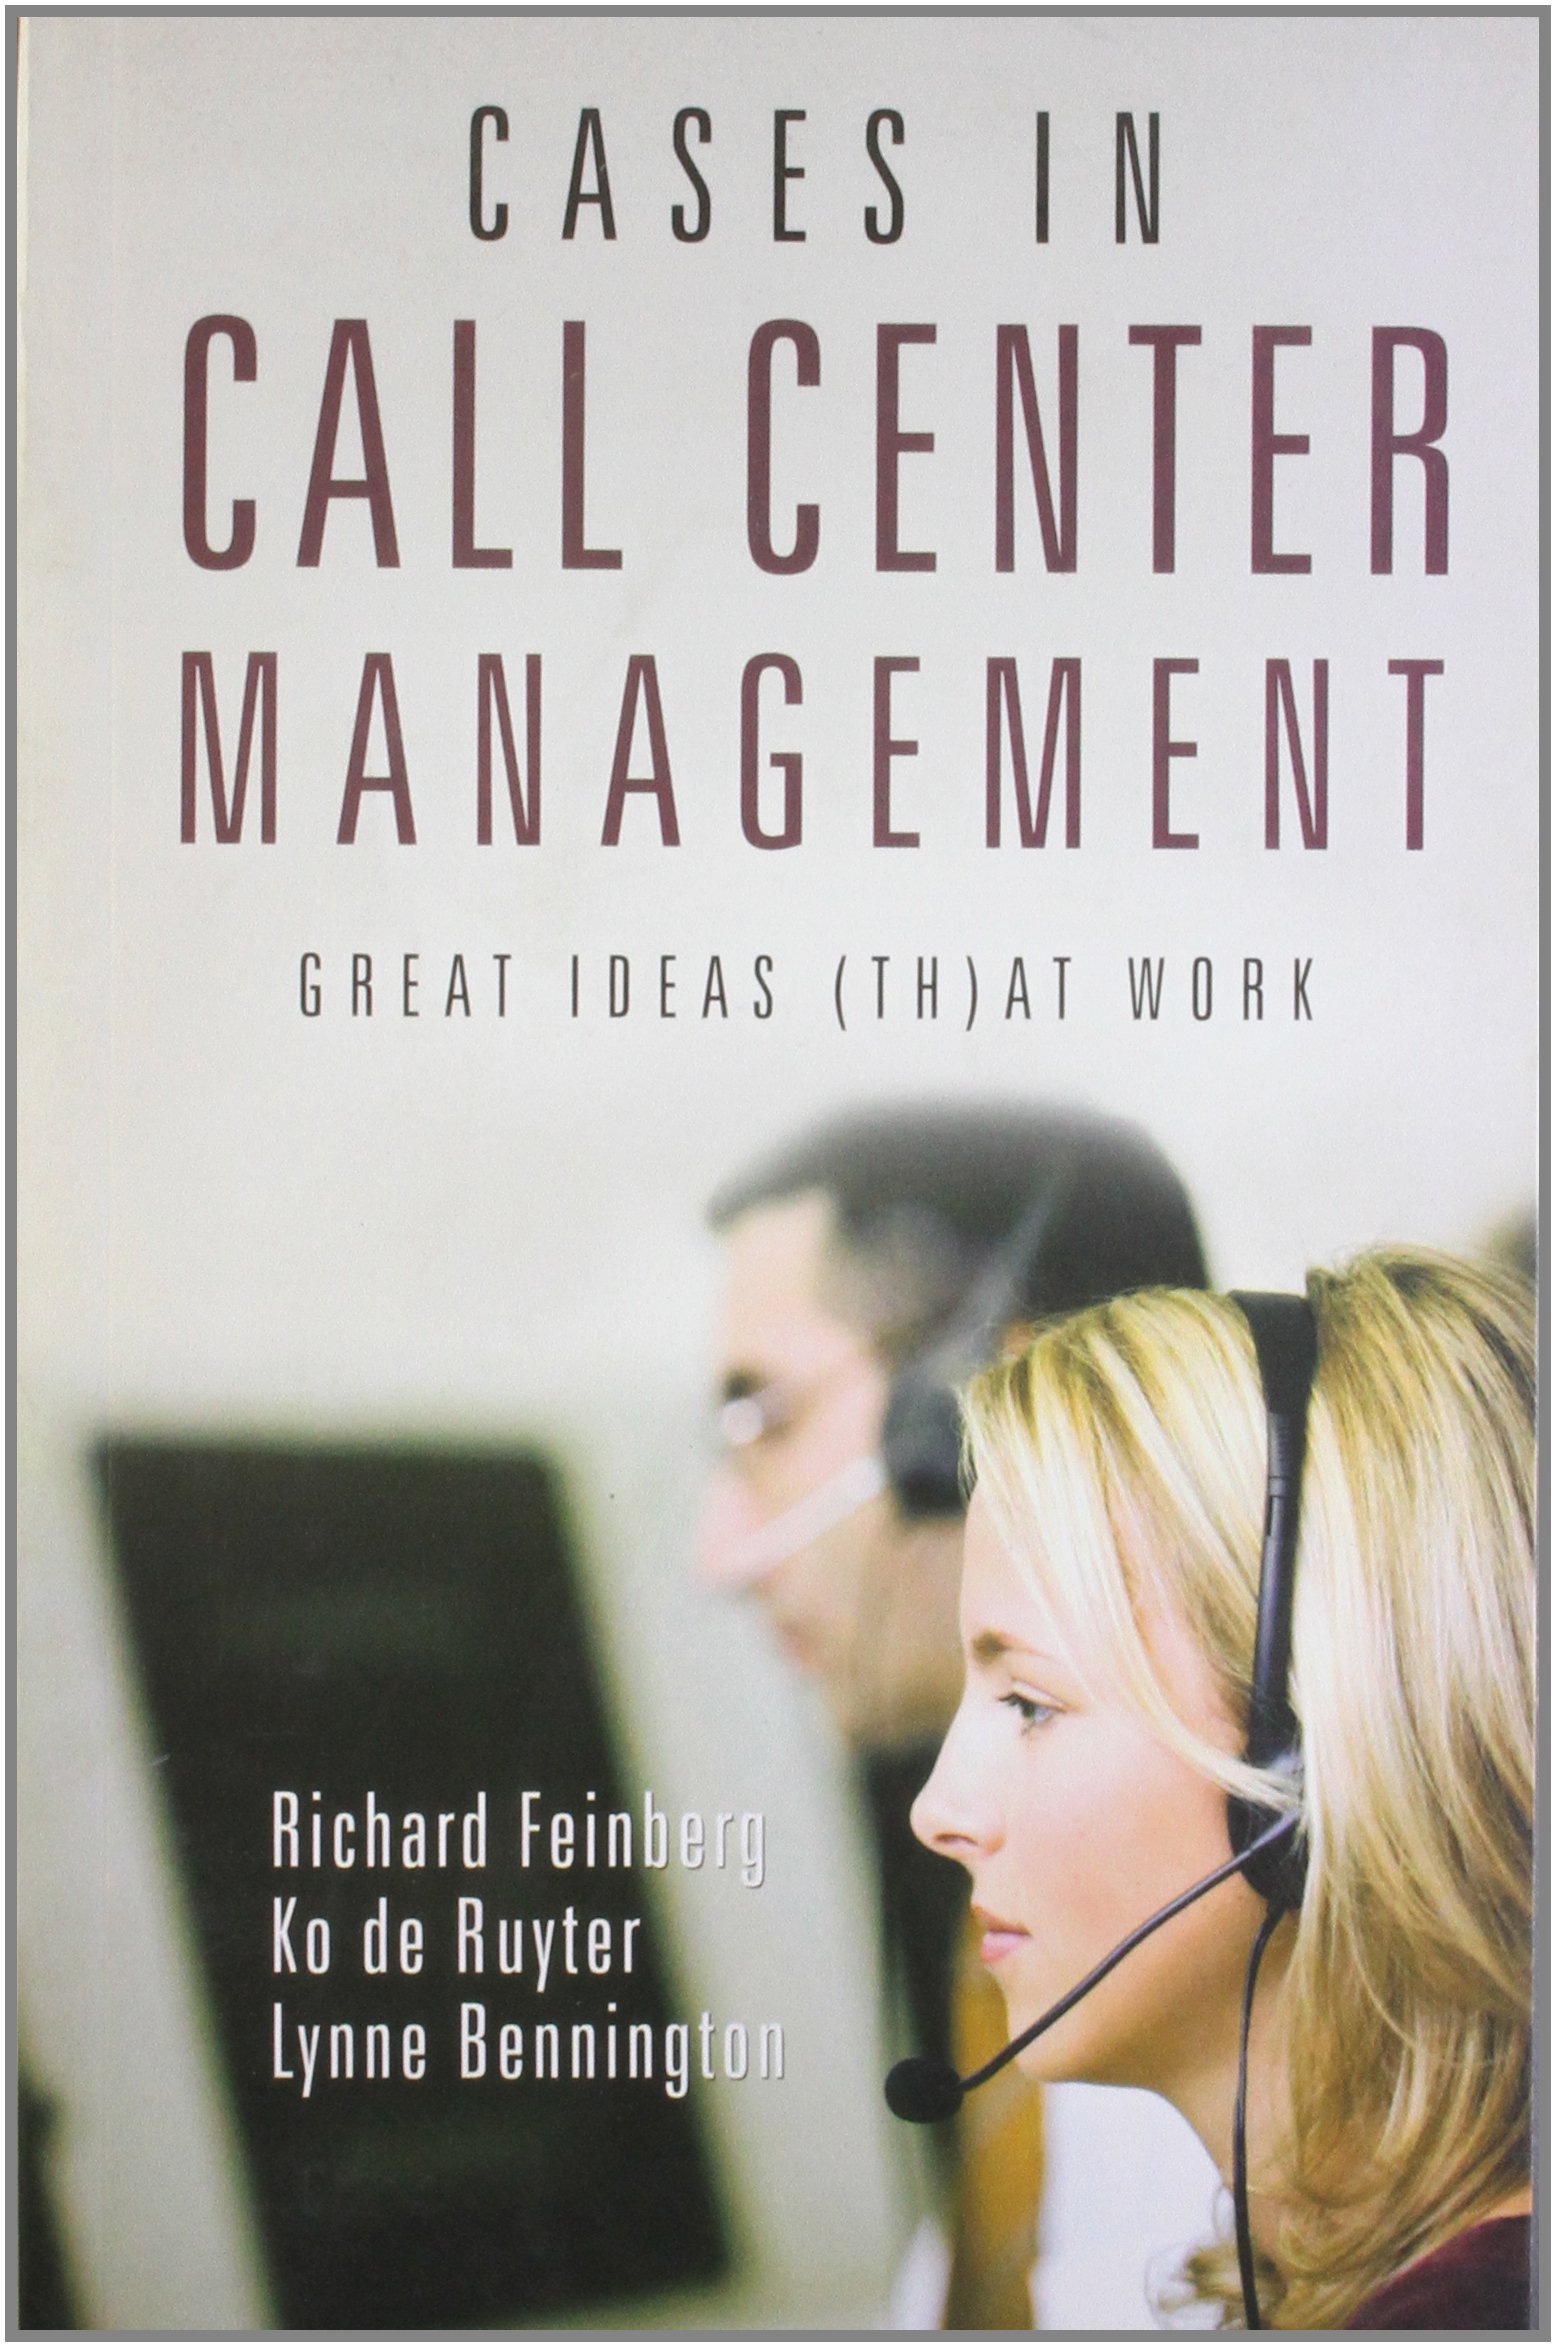 Cases In Call Center Management